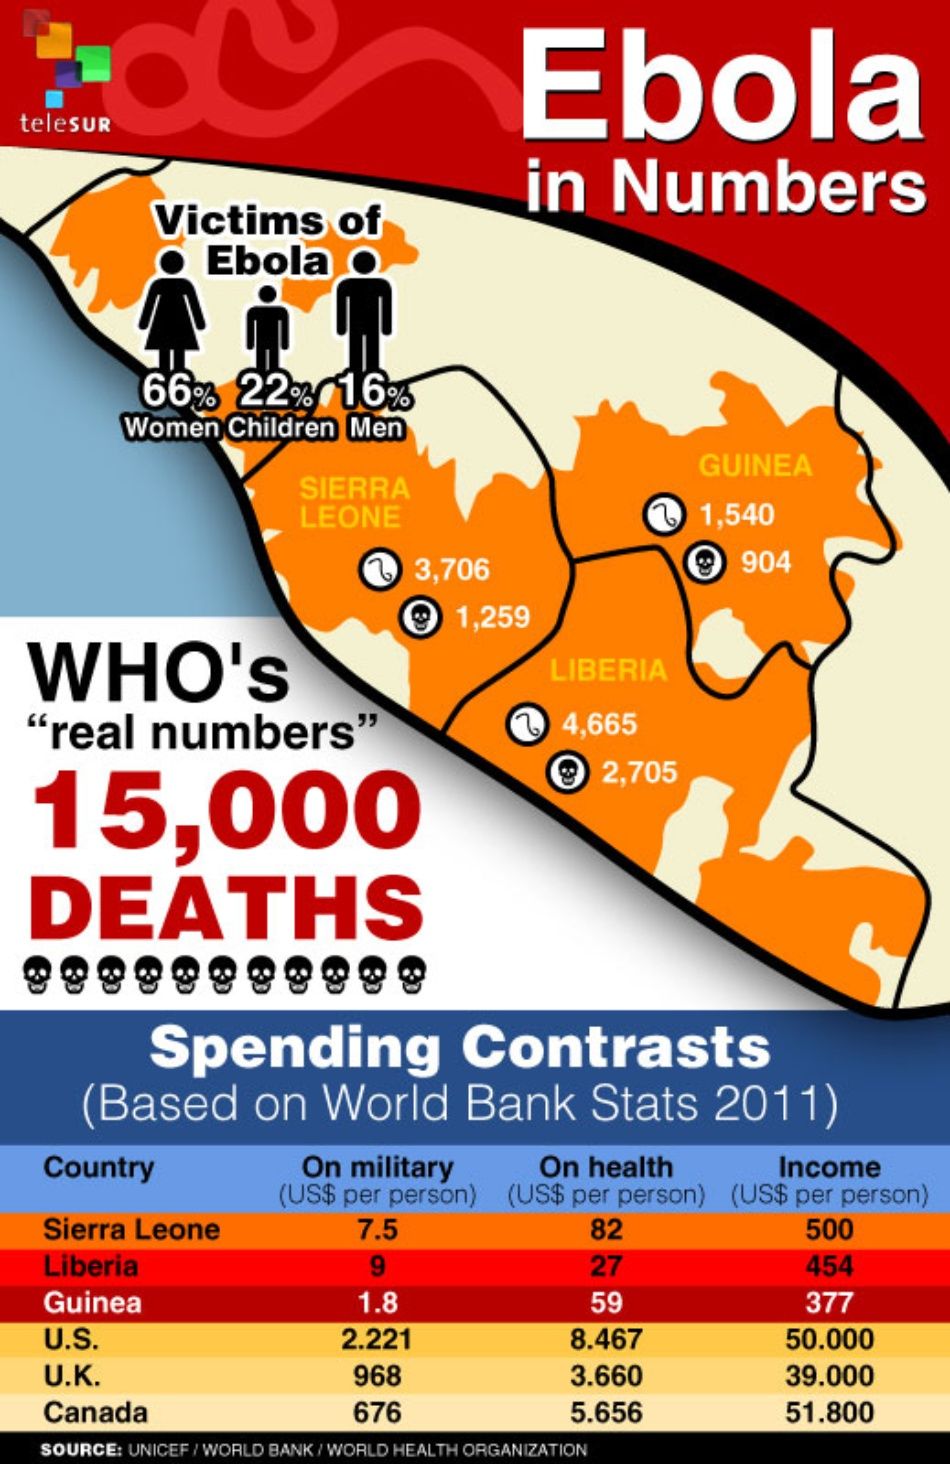 In Numbers: Ebola